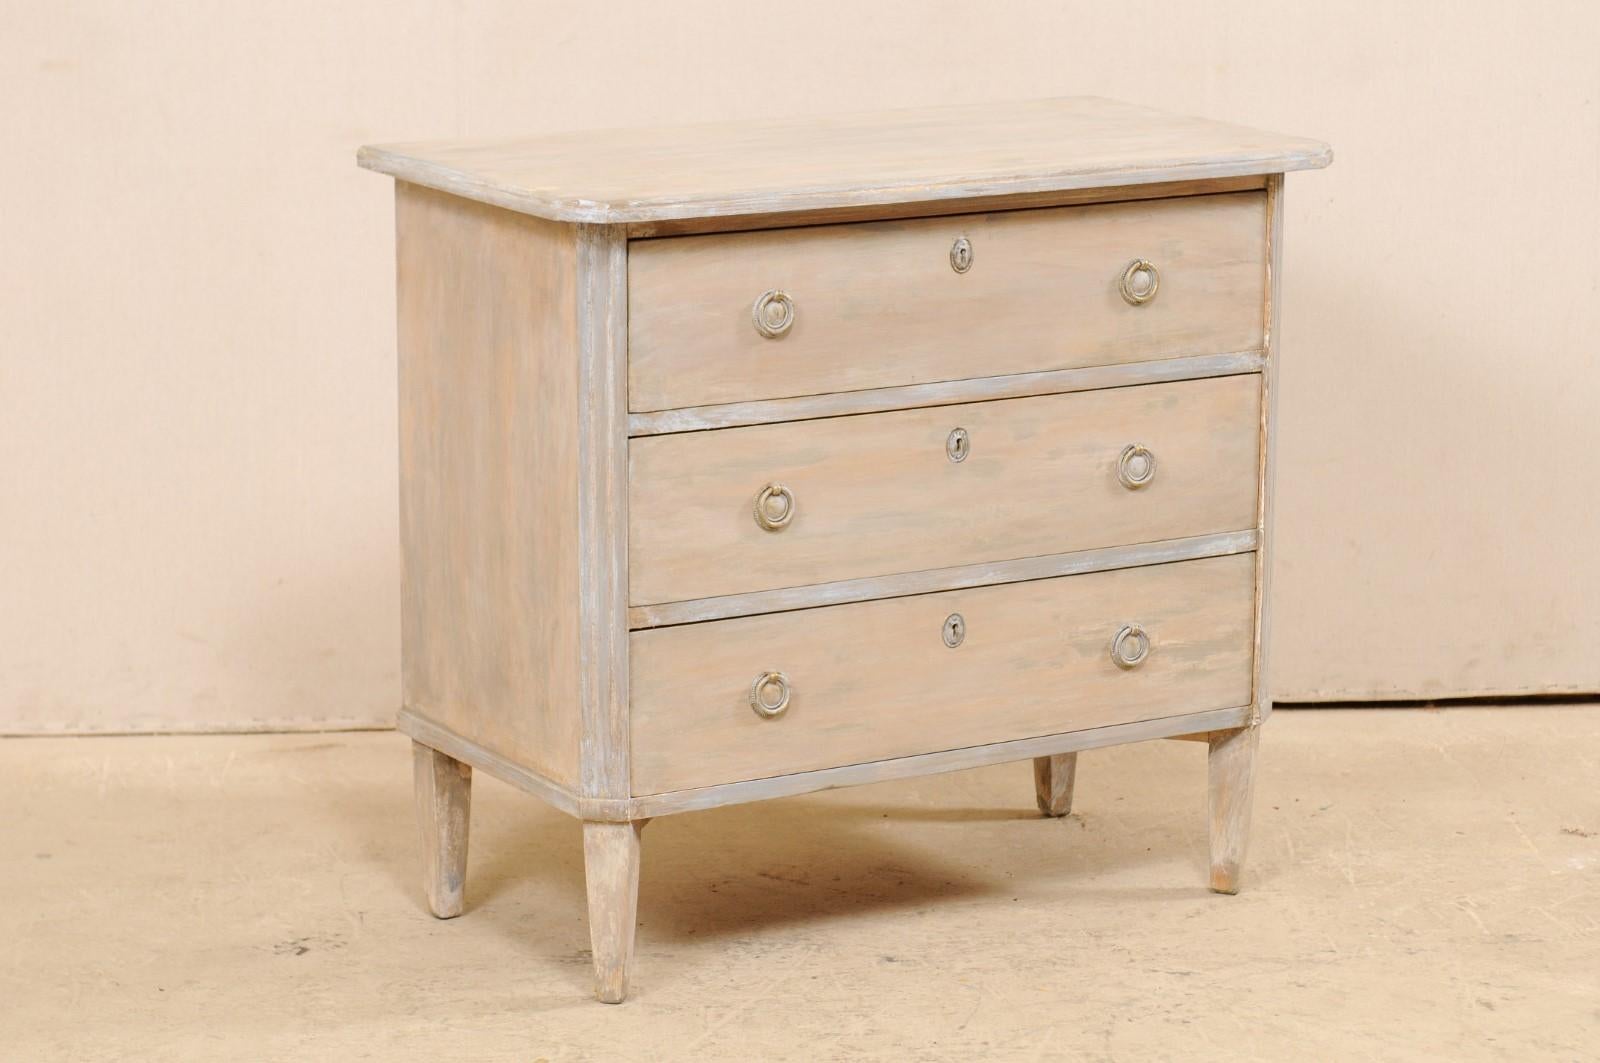 A Swedish Gustavian style chest of drawers from the mid-20th century. This vintage chest from Sweden, designed in typical Gustavian style, features a simple, clean design with canted front side posts adorn with fluted carving. The top is slightly